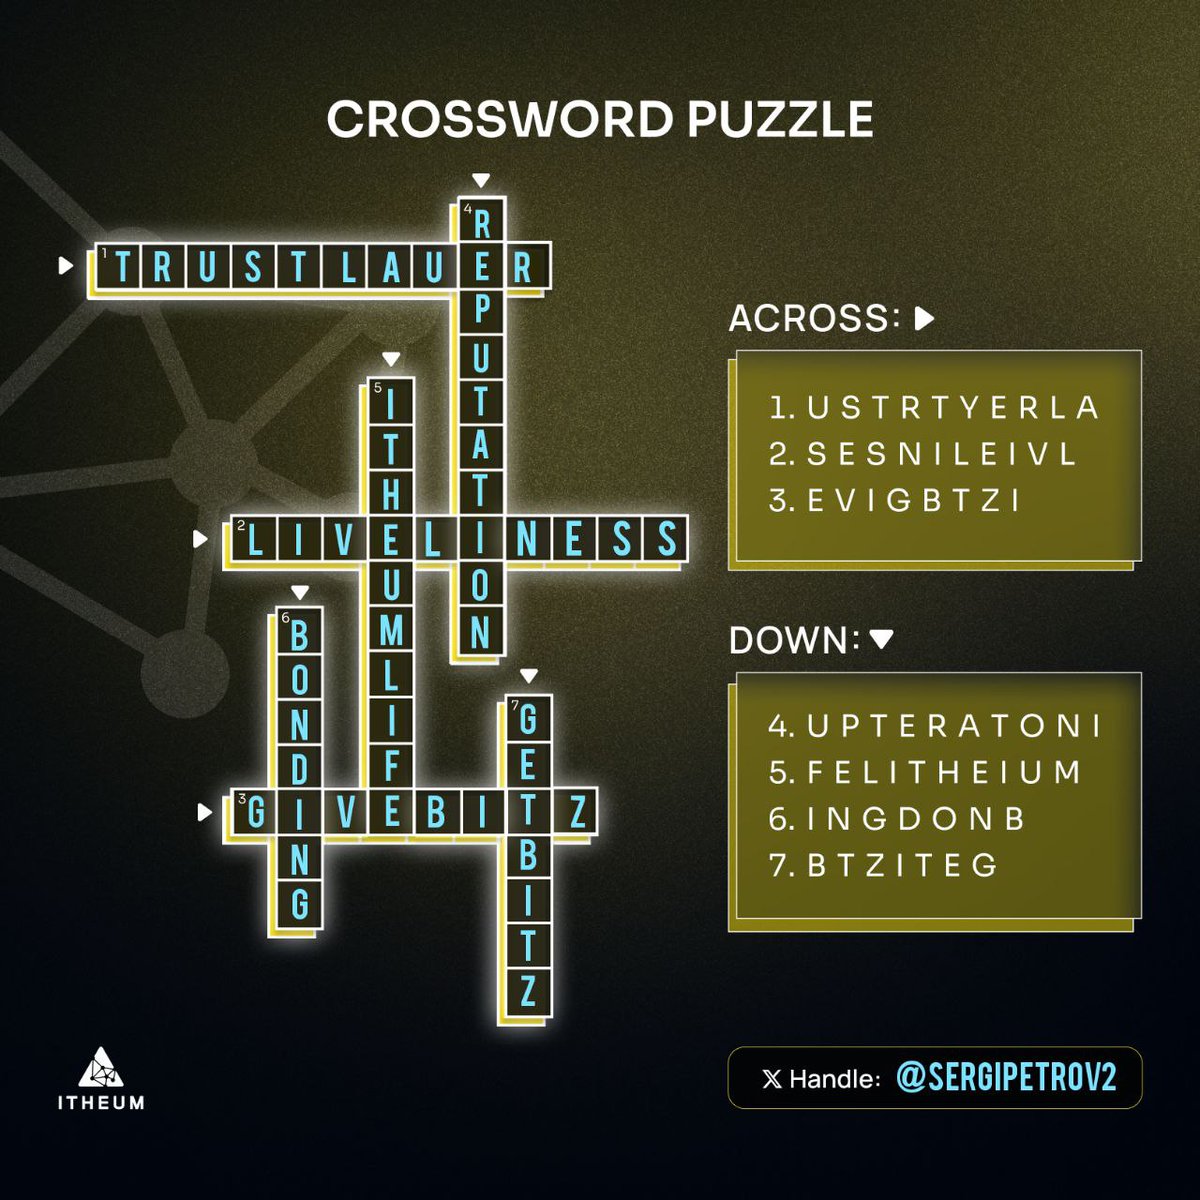 Hurry up to participate in @Itheum Quest 10. Some of the words in this crossword puzzle were difficult, try to decipher all the hidden words. Don't forget to go get your BiTz points before bed #Itheum #Ith4umLife #DataNFTs #BiTz #Quest